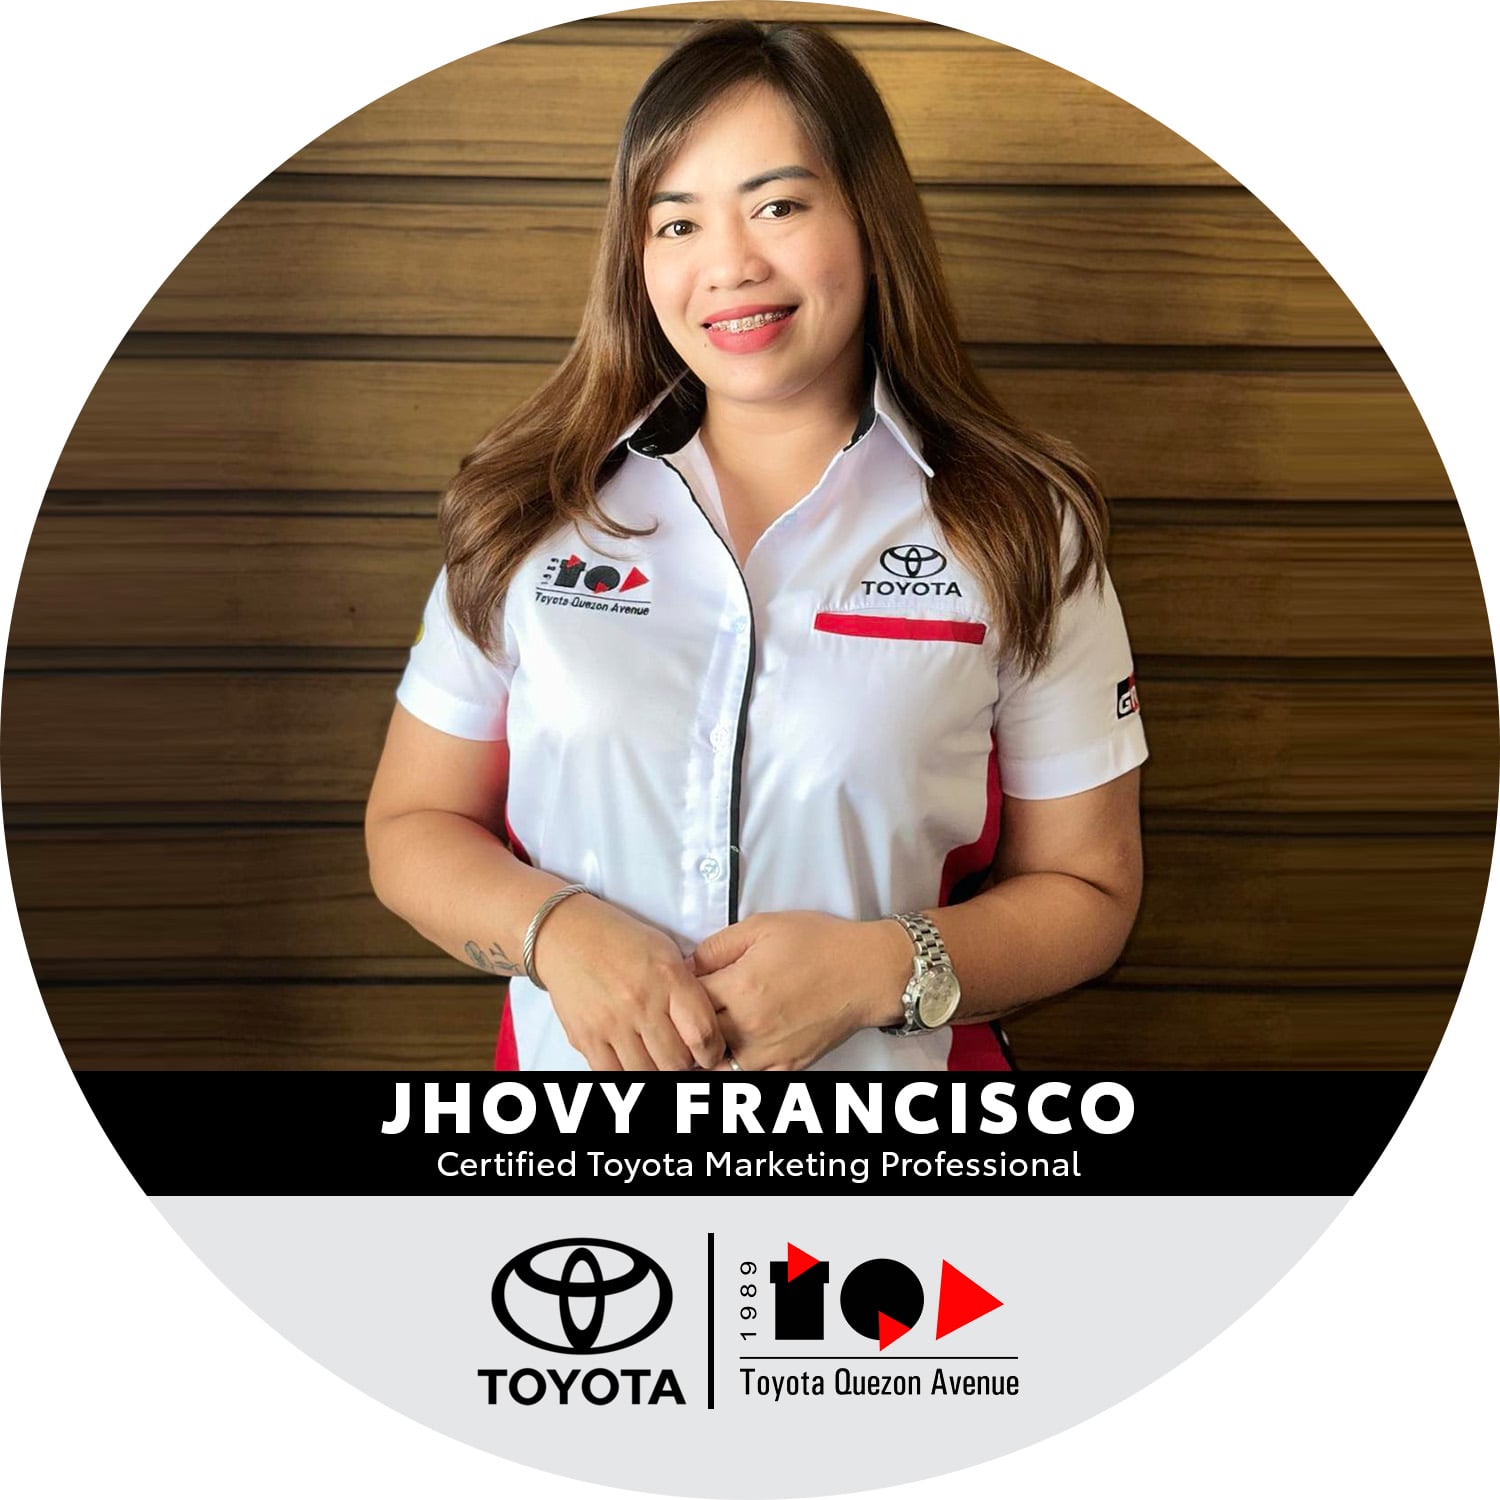 Certified Toyota Marketing Professionals - Jhovy Francisco